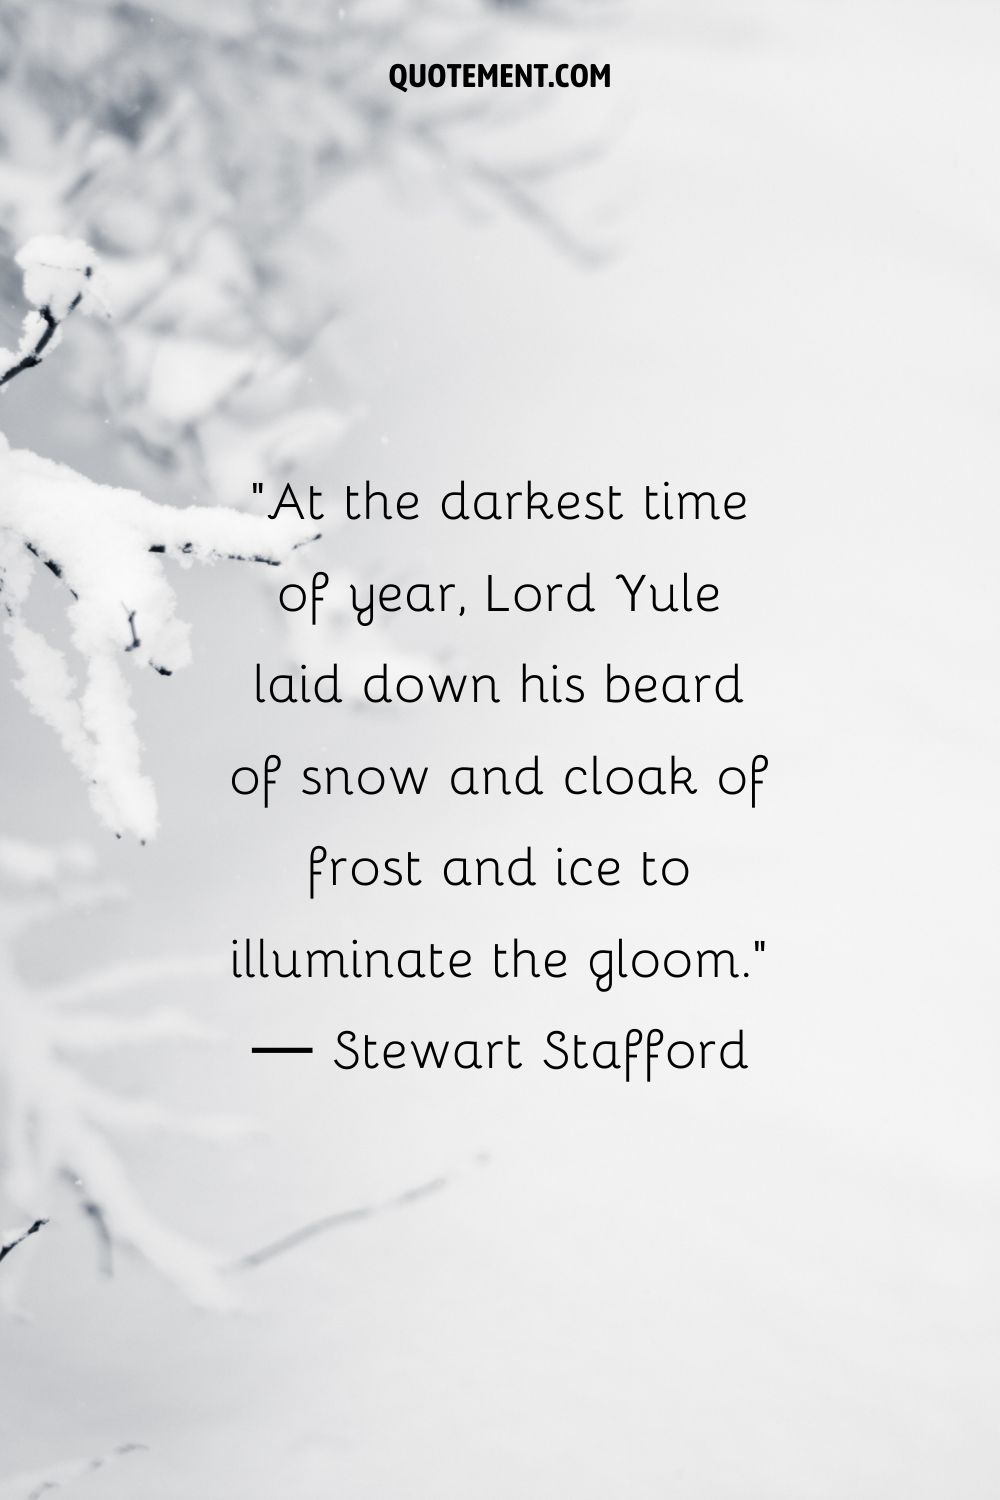 Snow-laden branches representing an amazing winter solstice quote